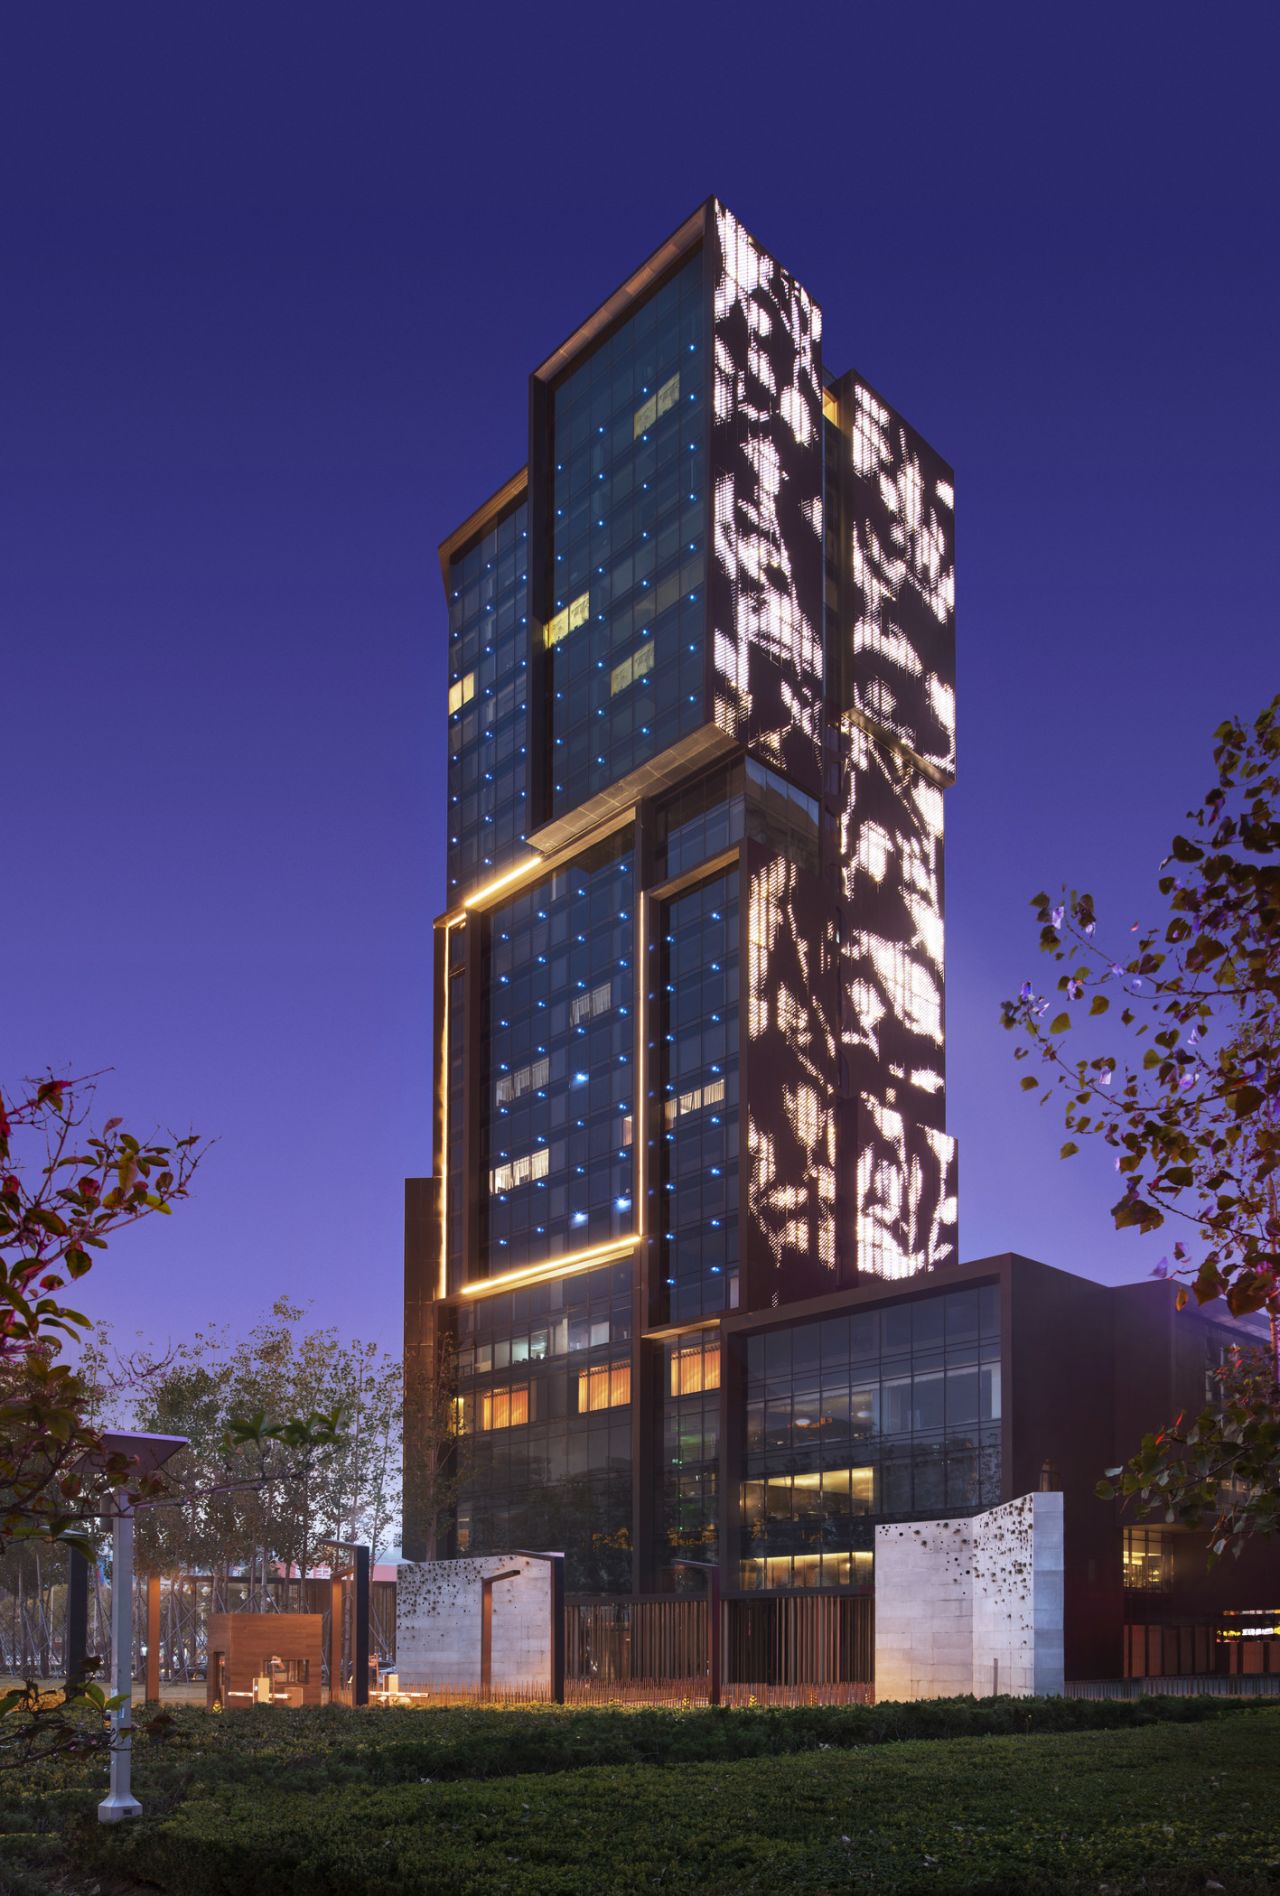 <strong>Le Meridien Zhengzhou, Zhengzhou</strong><br /><strong>Architect: </strong>Neri & Hu, Shanghai<br /><strong>Status: </strong>Opened in 2013<br /><strong>Rooms</strong>: 350<br /><strong>Fast fact: </strong>This 25-story building's design revolves around the Chinese rose flower -- the local wildflower of Henan province, where it's based. The podium and central elevator was conceived as a cave, inspired by the nearby historic Longmen Grottoes.<br /><a href="http://www.starwoodhotels.com/lemeridien/property/overview/index.html?propertyID=3248" target="_blank" target="_blank"><em>Le Méridien Zhengzho</em></a><em>, Zhongzhou Avenue, Jinshui District, Zhengzhou, Henan; +86 371 5599 8888</em>